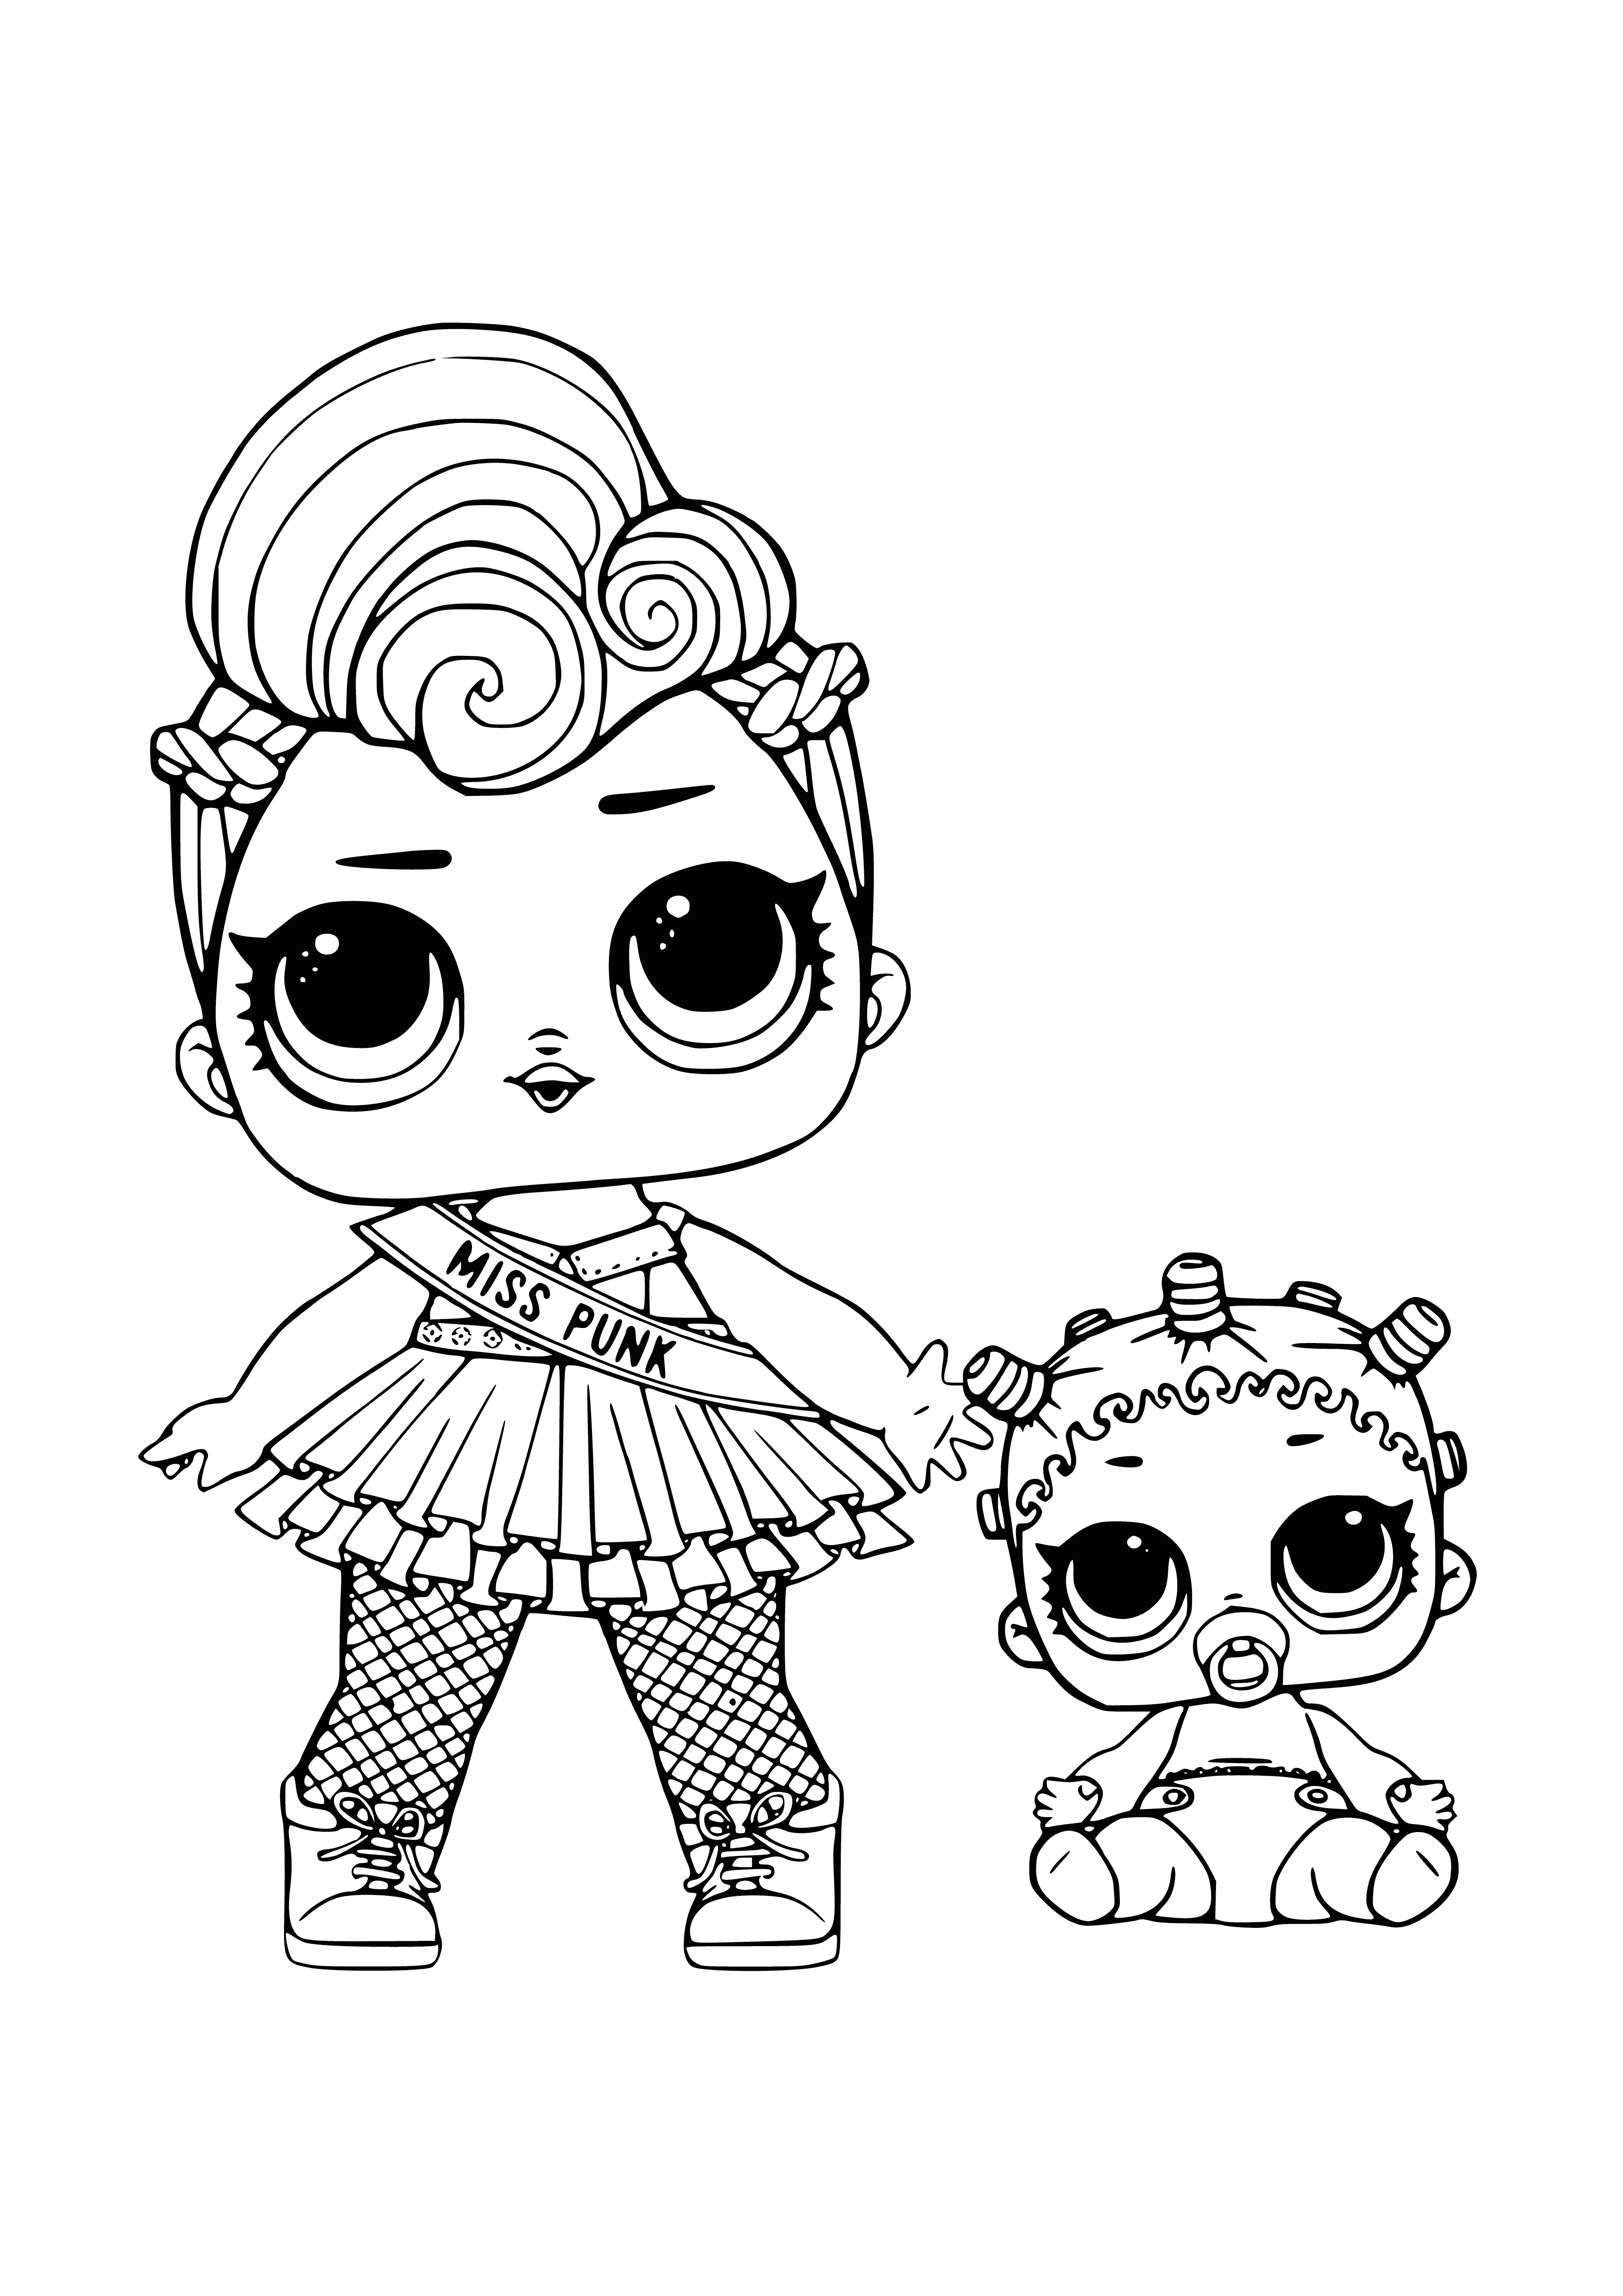 coloring page: Girl with blue hair in purple shirt and black leggings holding a baby doll.